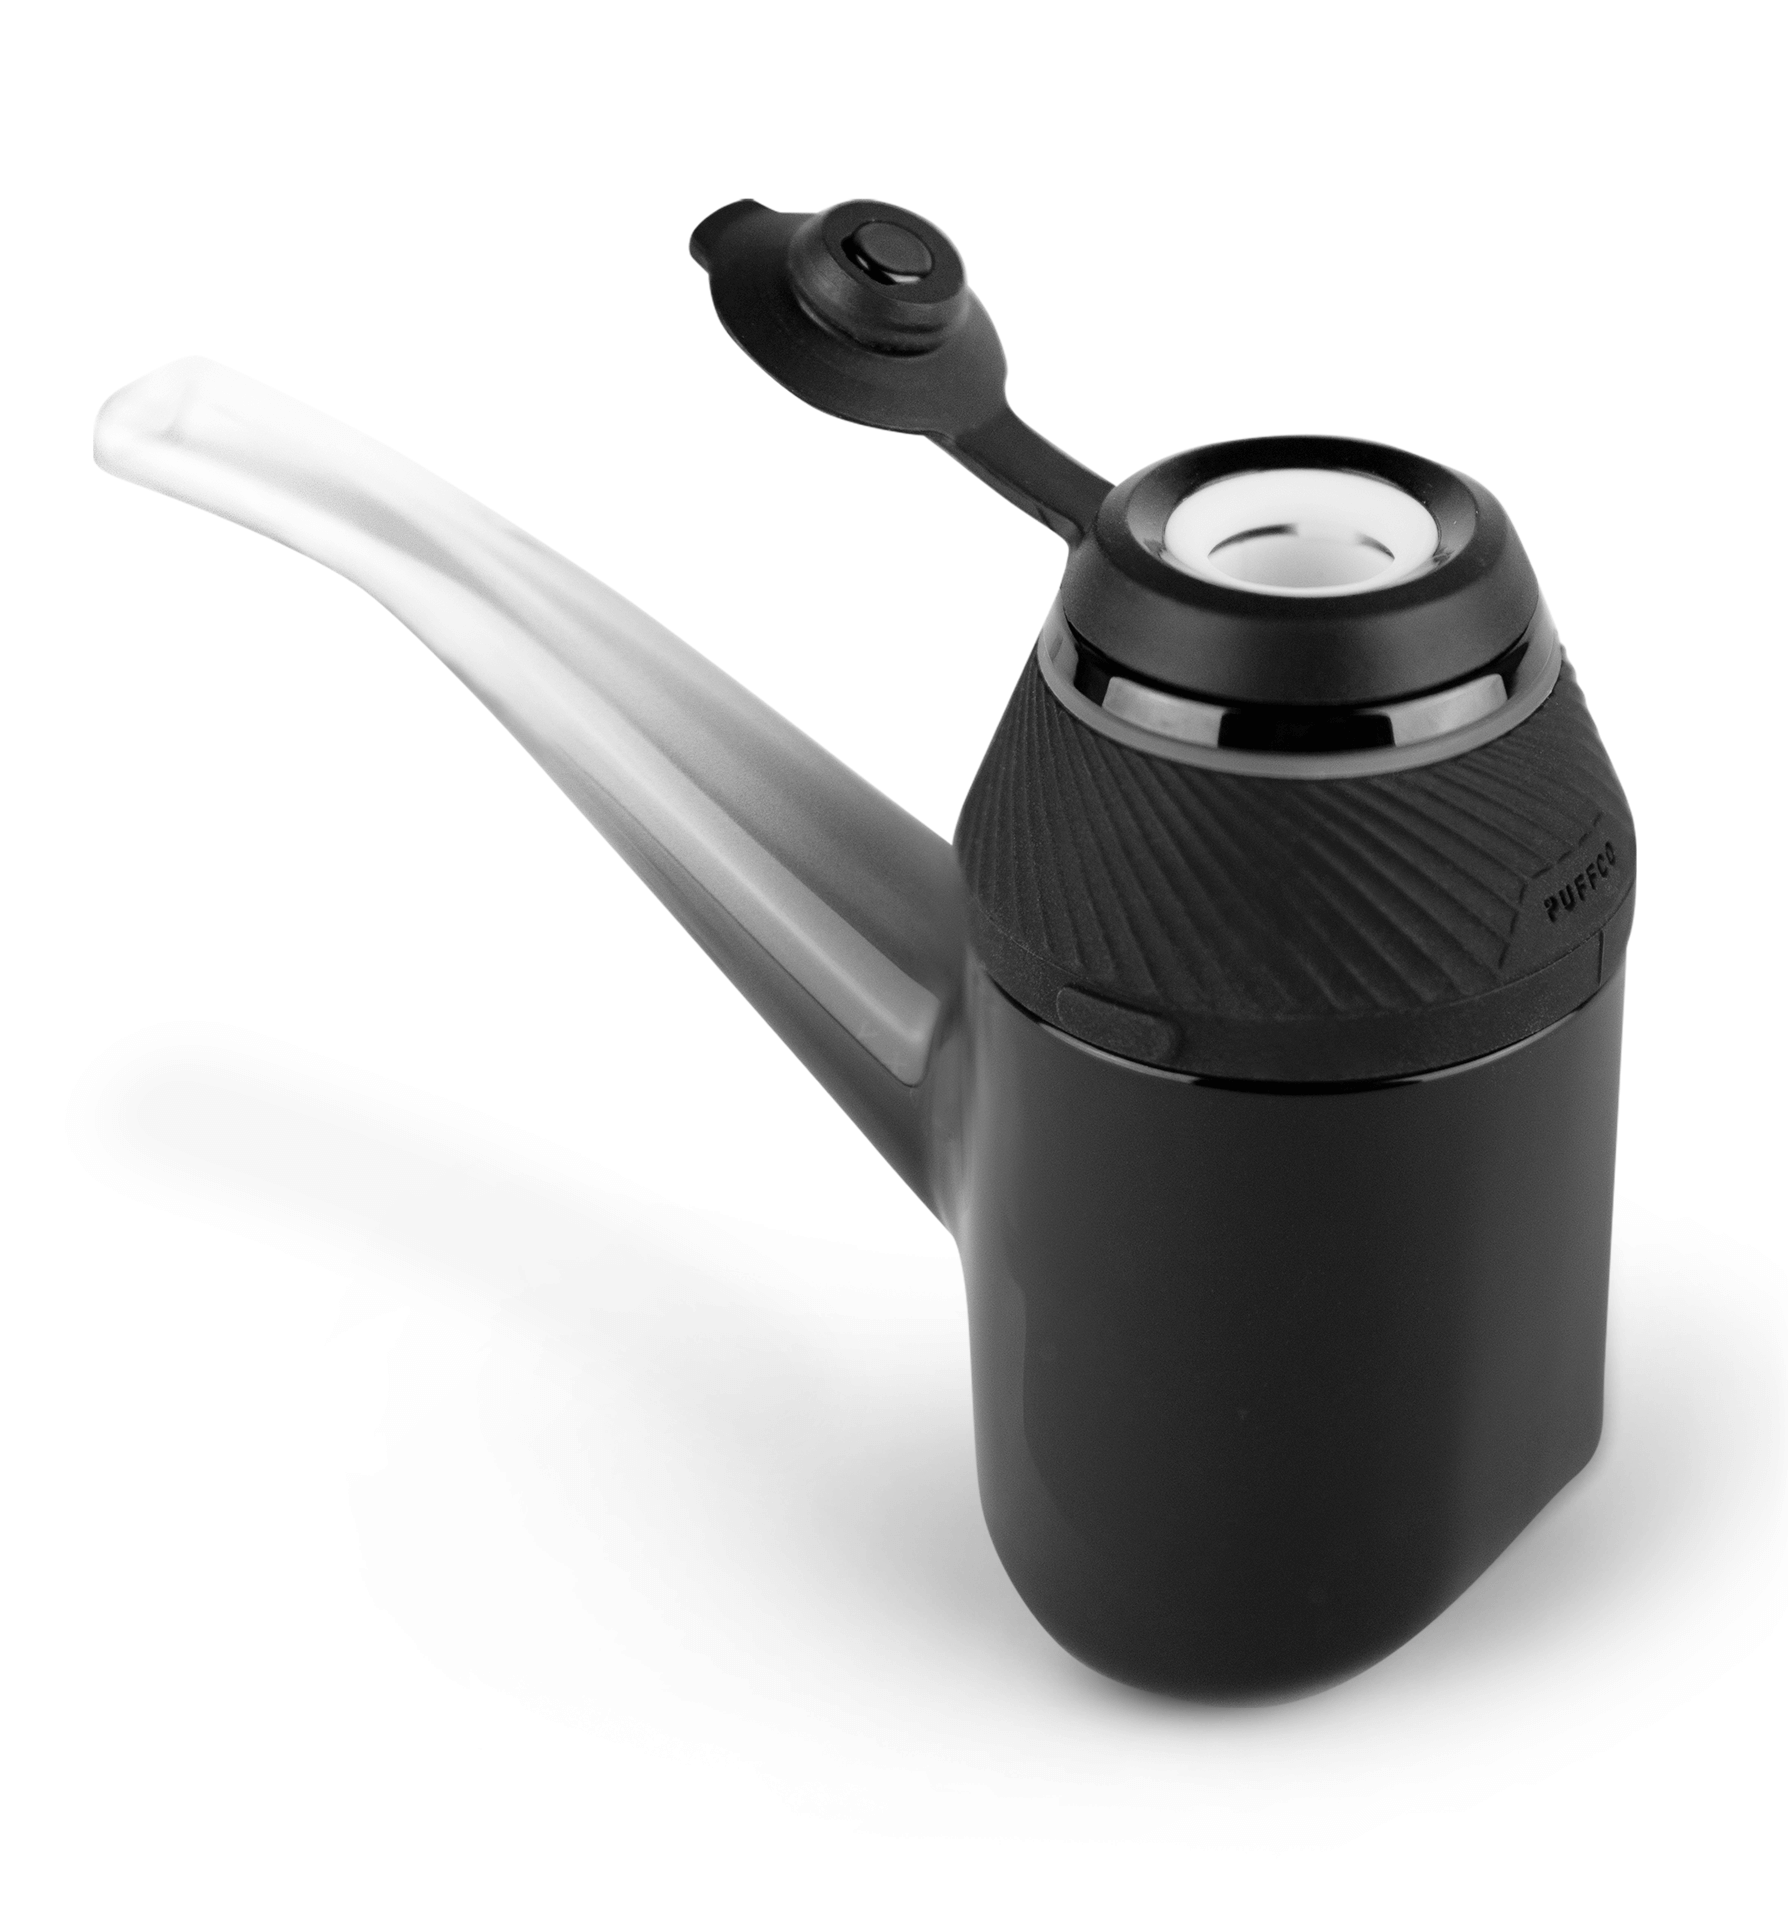 Angled side shot of black Puffco vaporizer kit with open cap